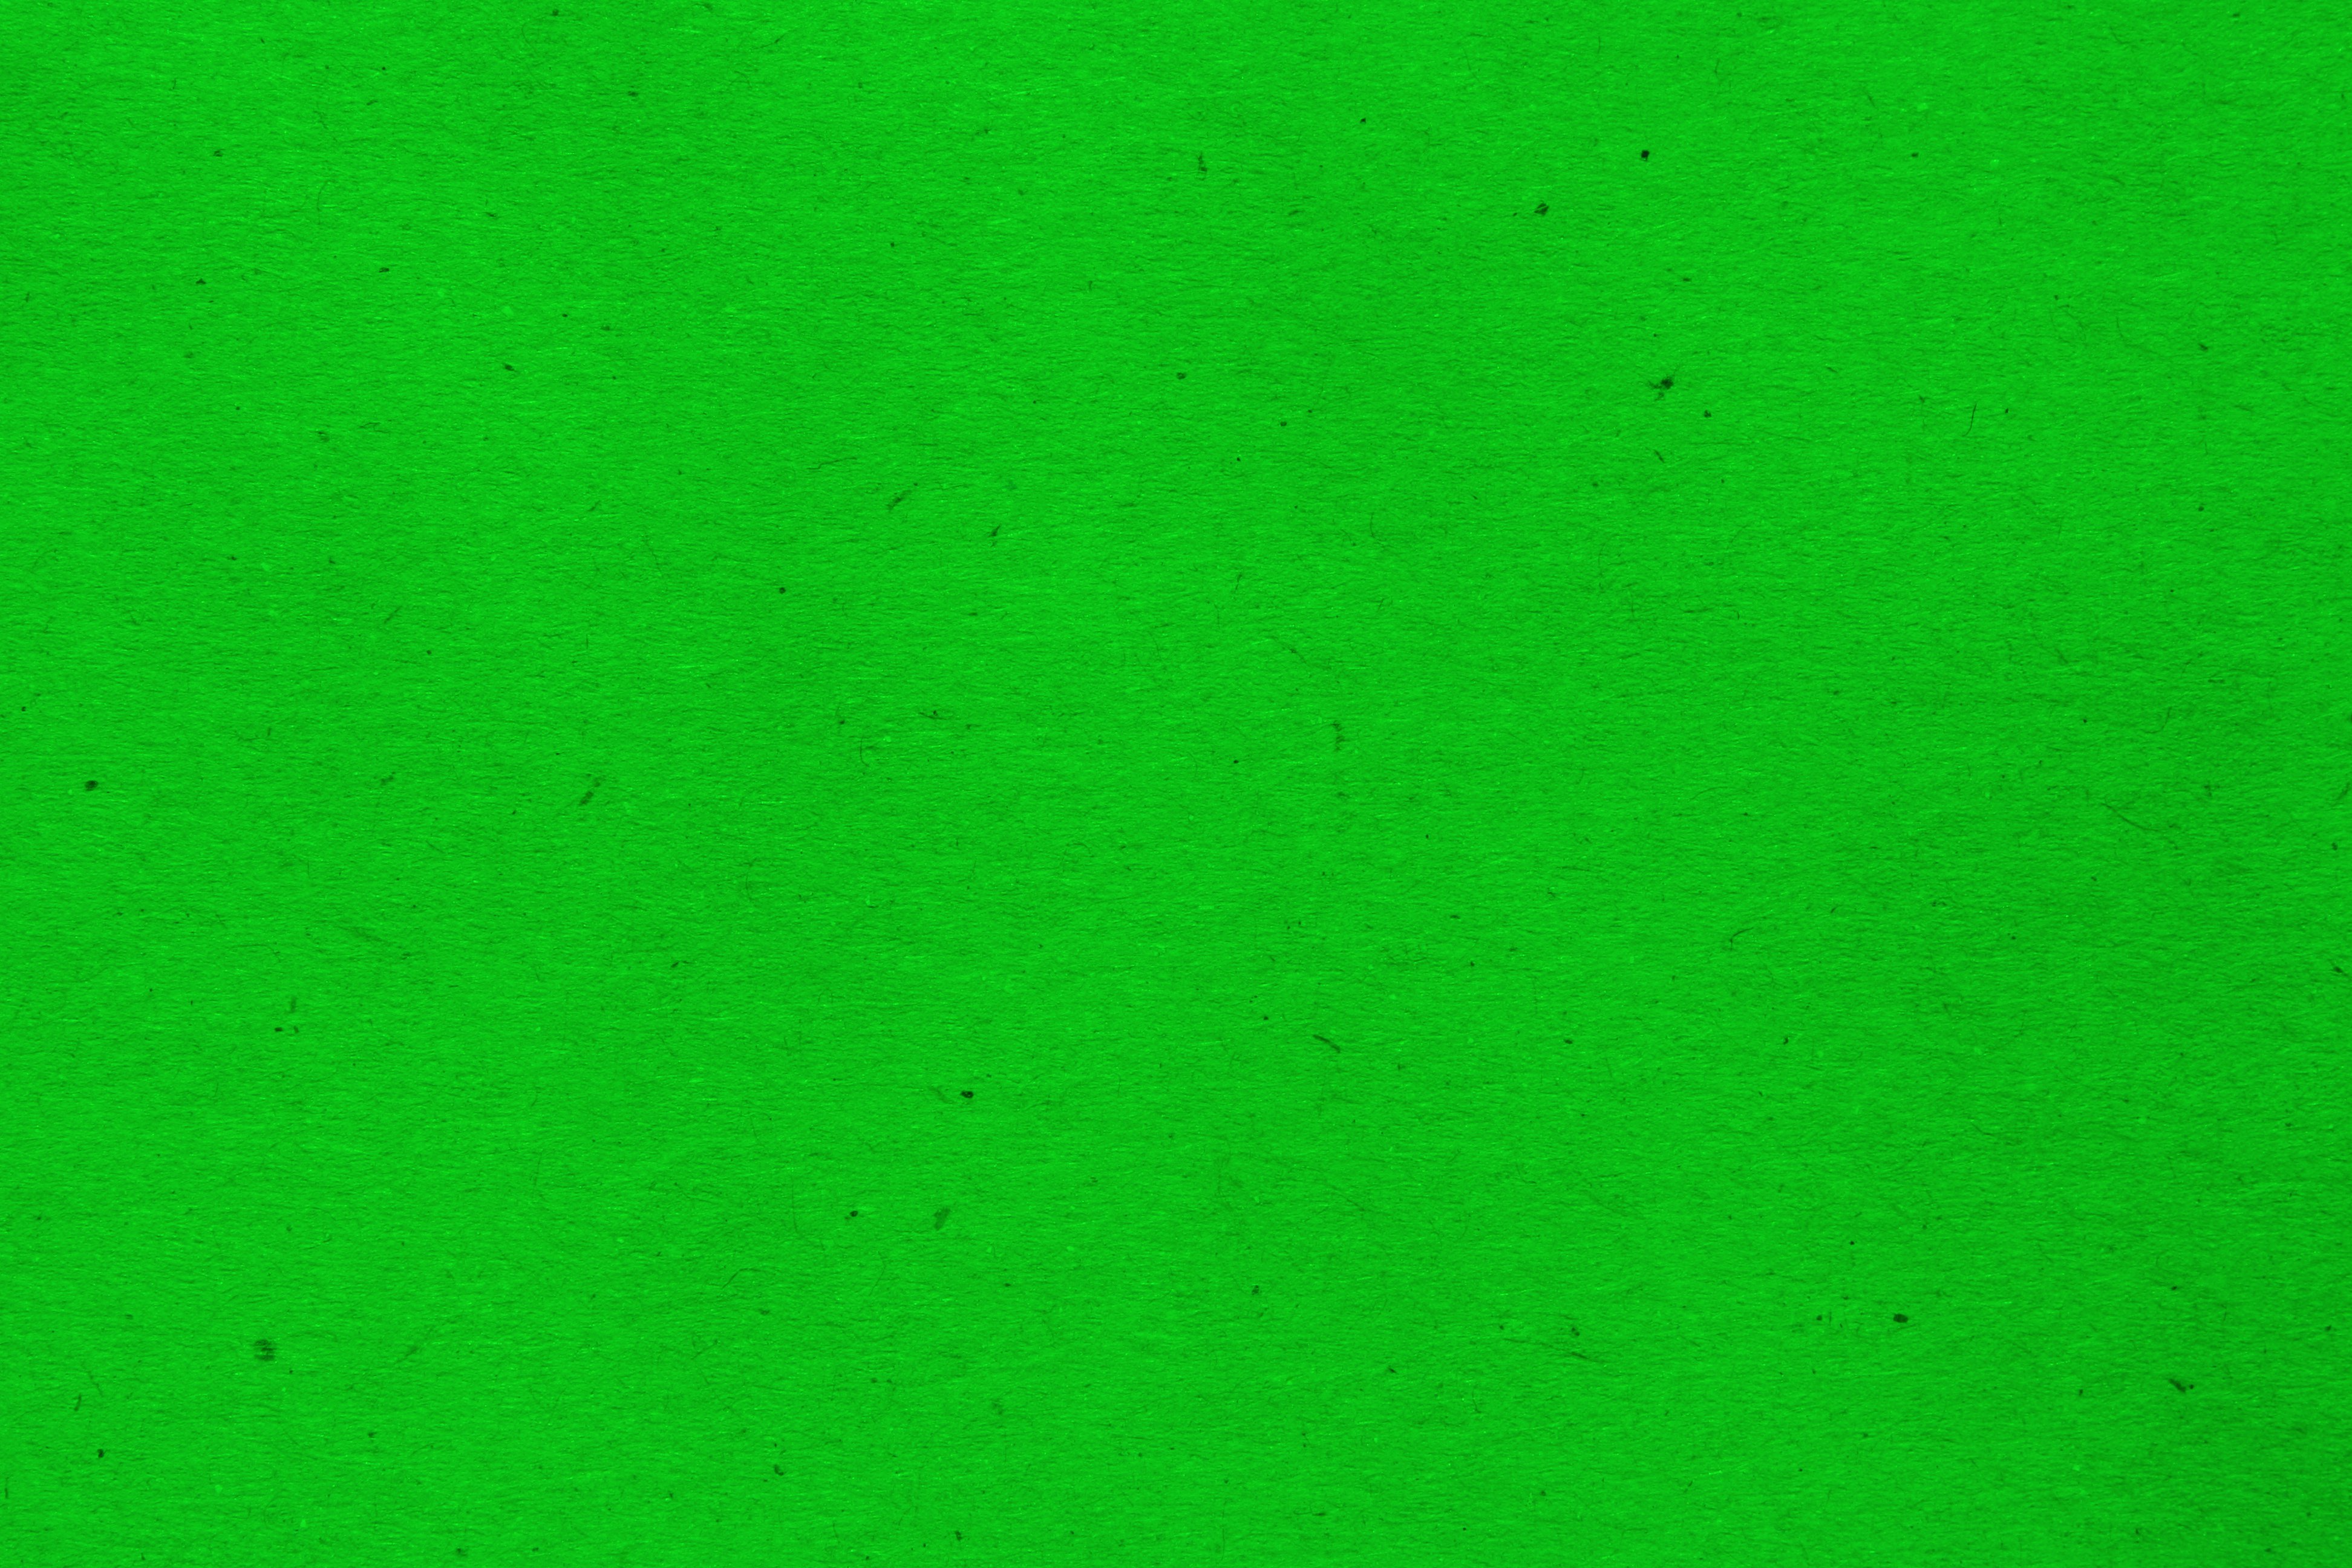 Neon Green Paper Texture with Flecks Picture | Free Photograph ...